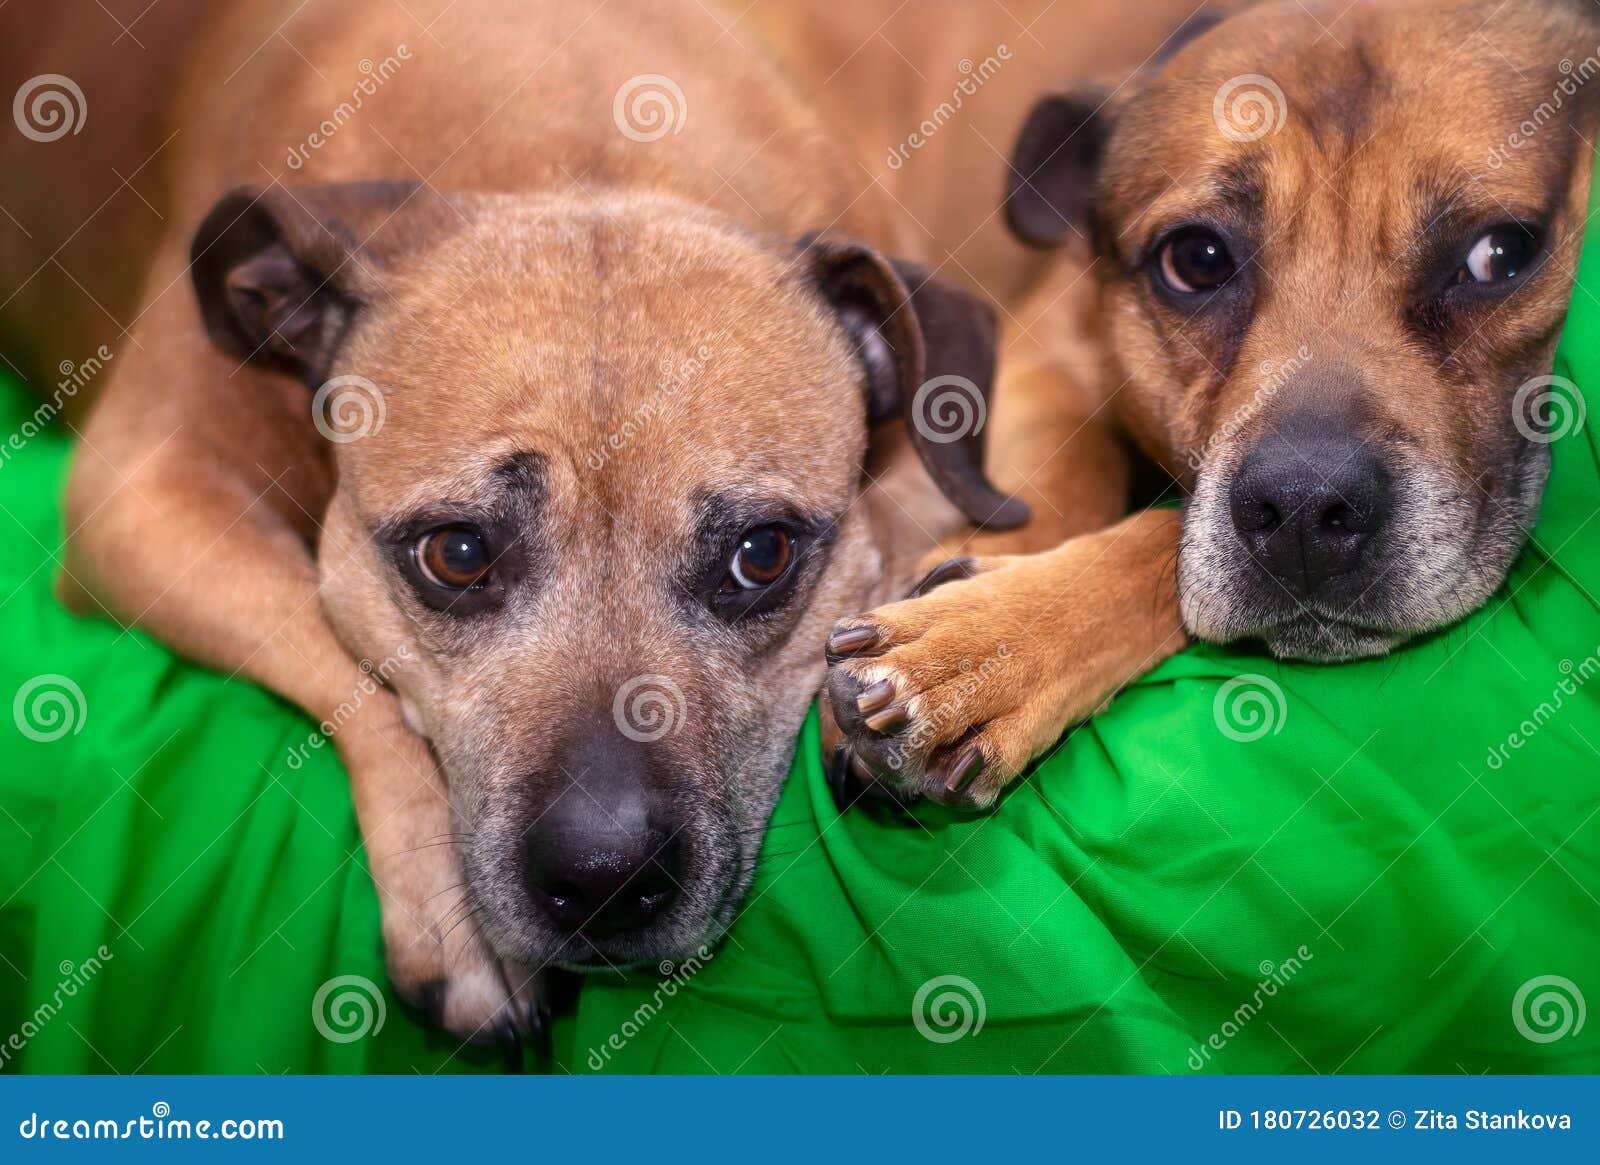 A Staffy And An Alsatian Resting Next To Each Other Stock Photo Image Of Staffie Cute 180726032